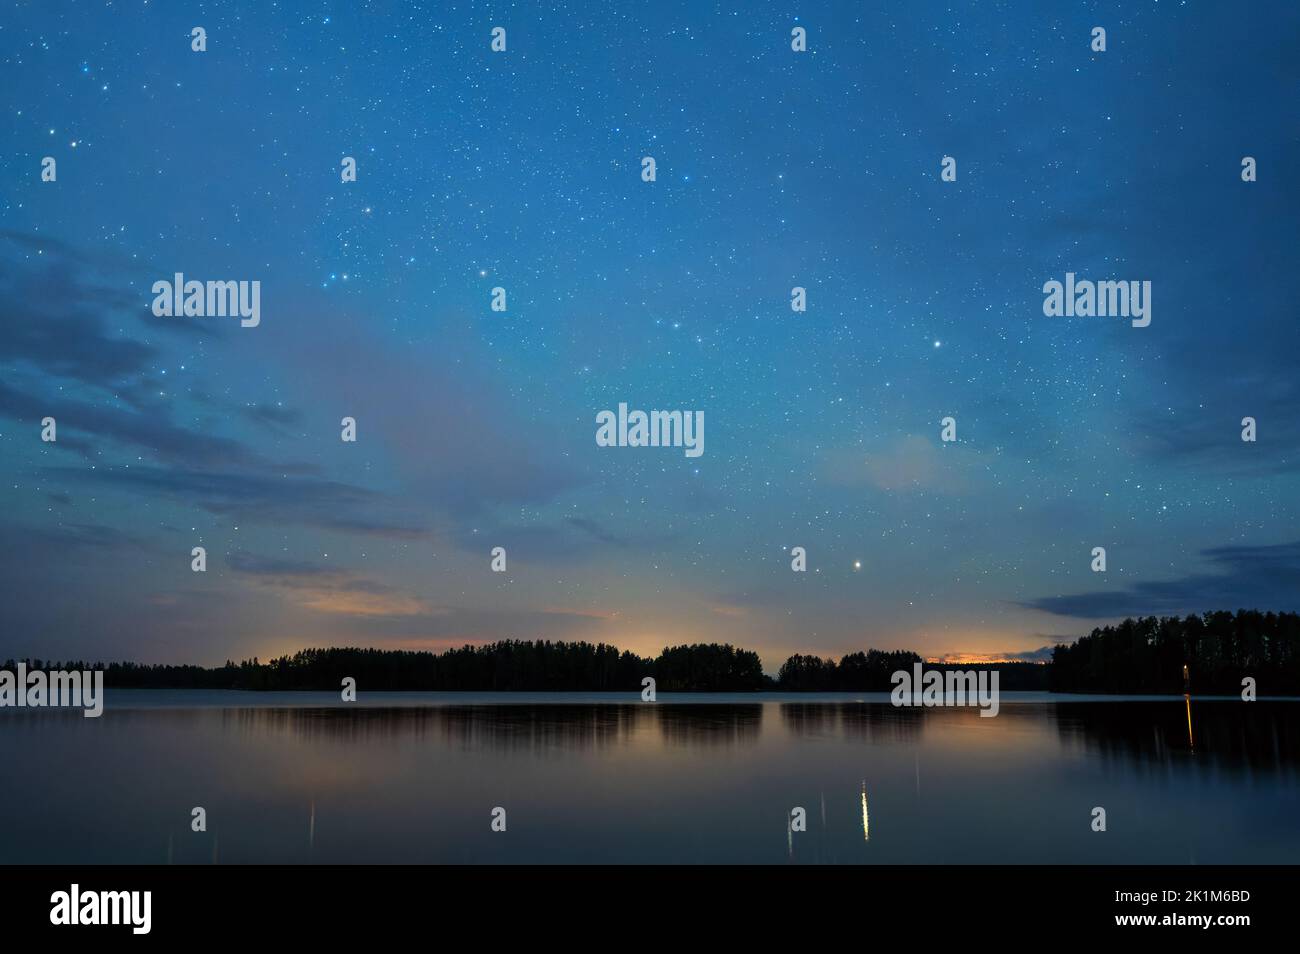 Night landscape under starry sky, stars reflecting from calm water surface, distant thunder in the horizon. Stock Photo